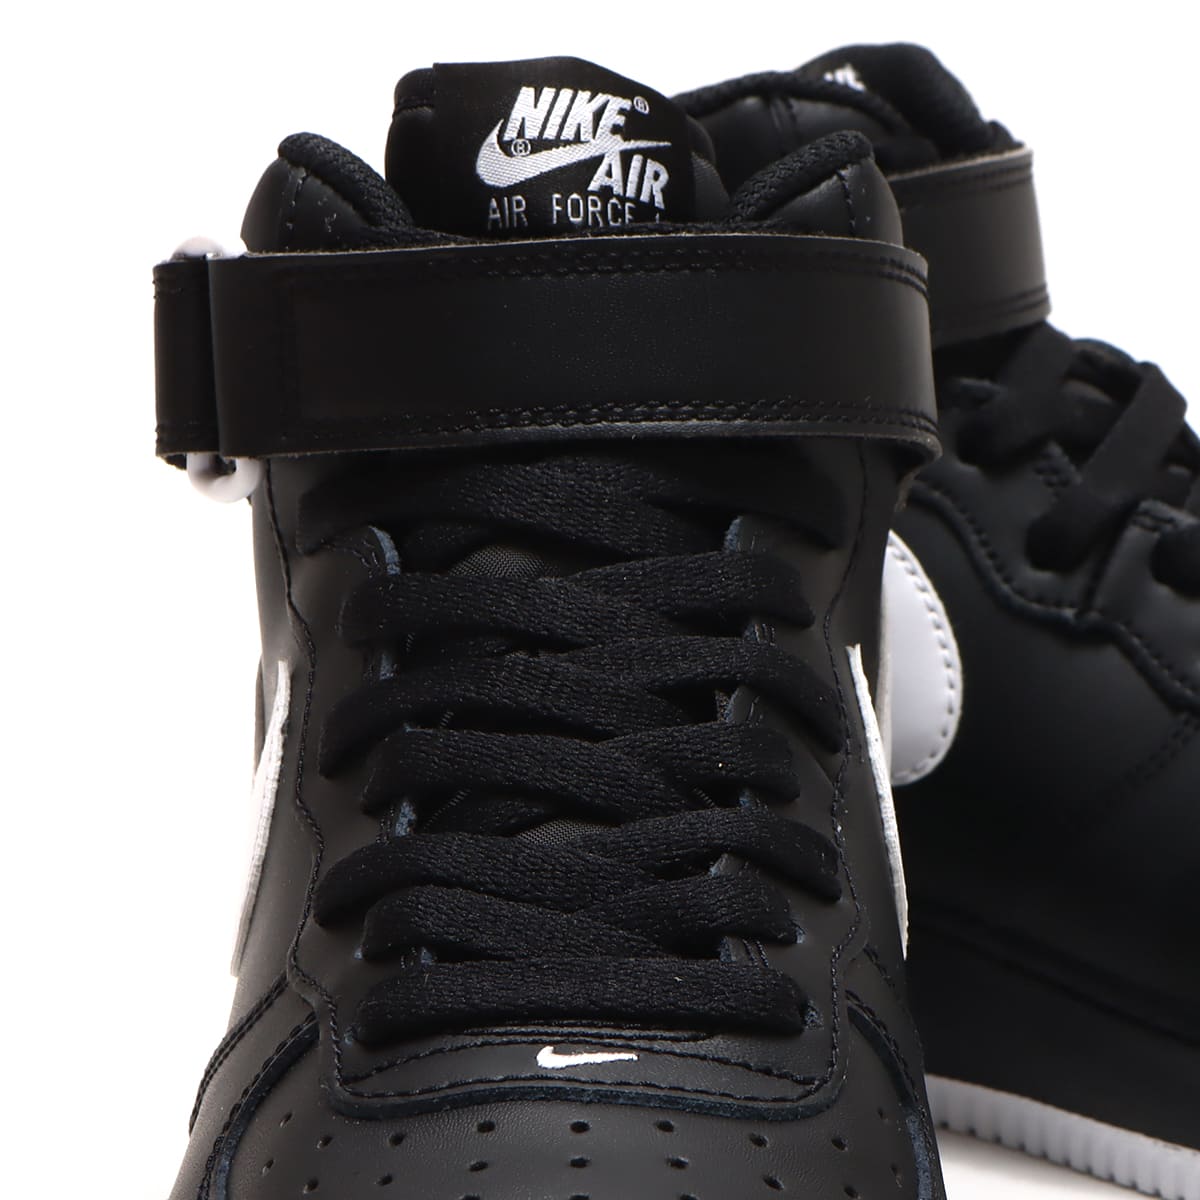 Nike Air Force 1 Mid Black White DV0806-001 Release Date